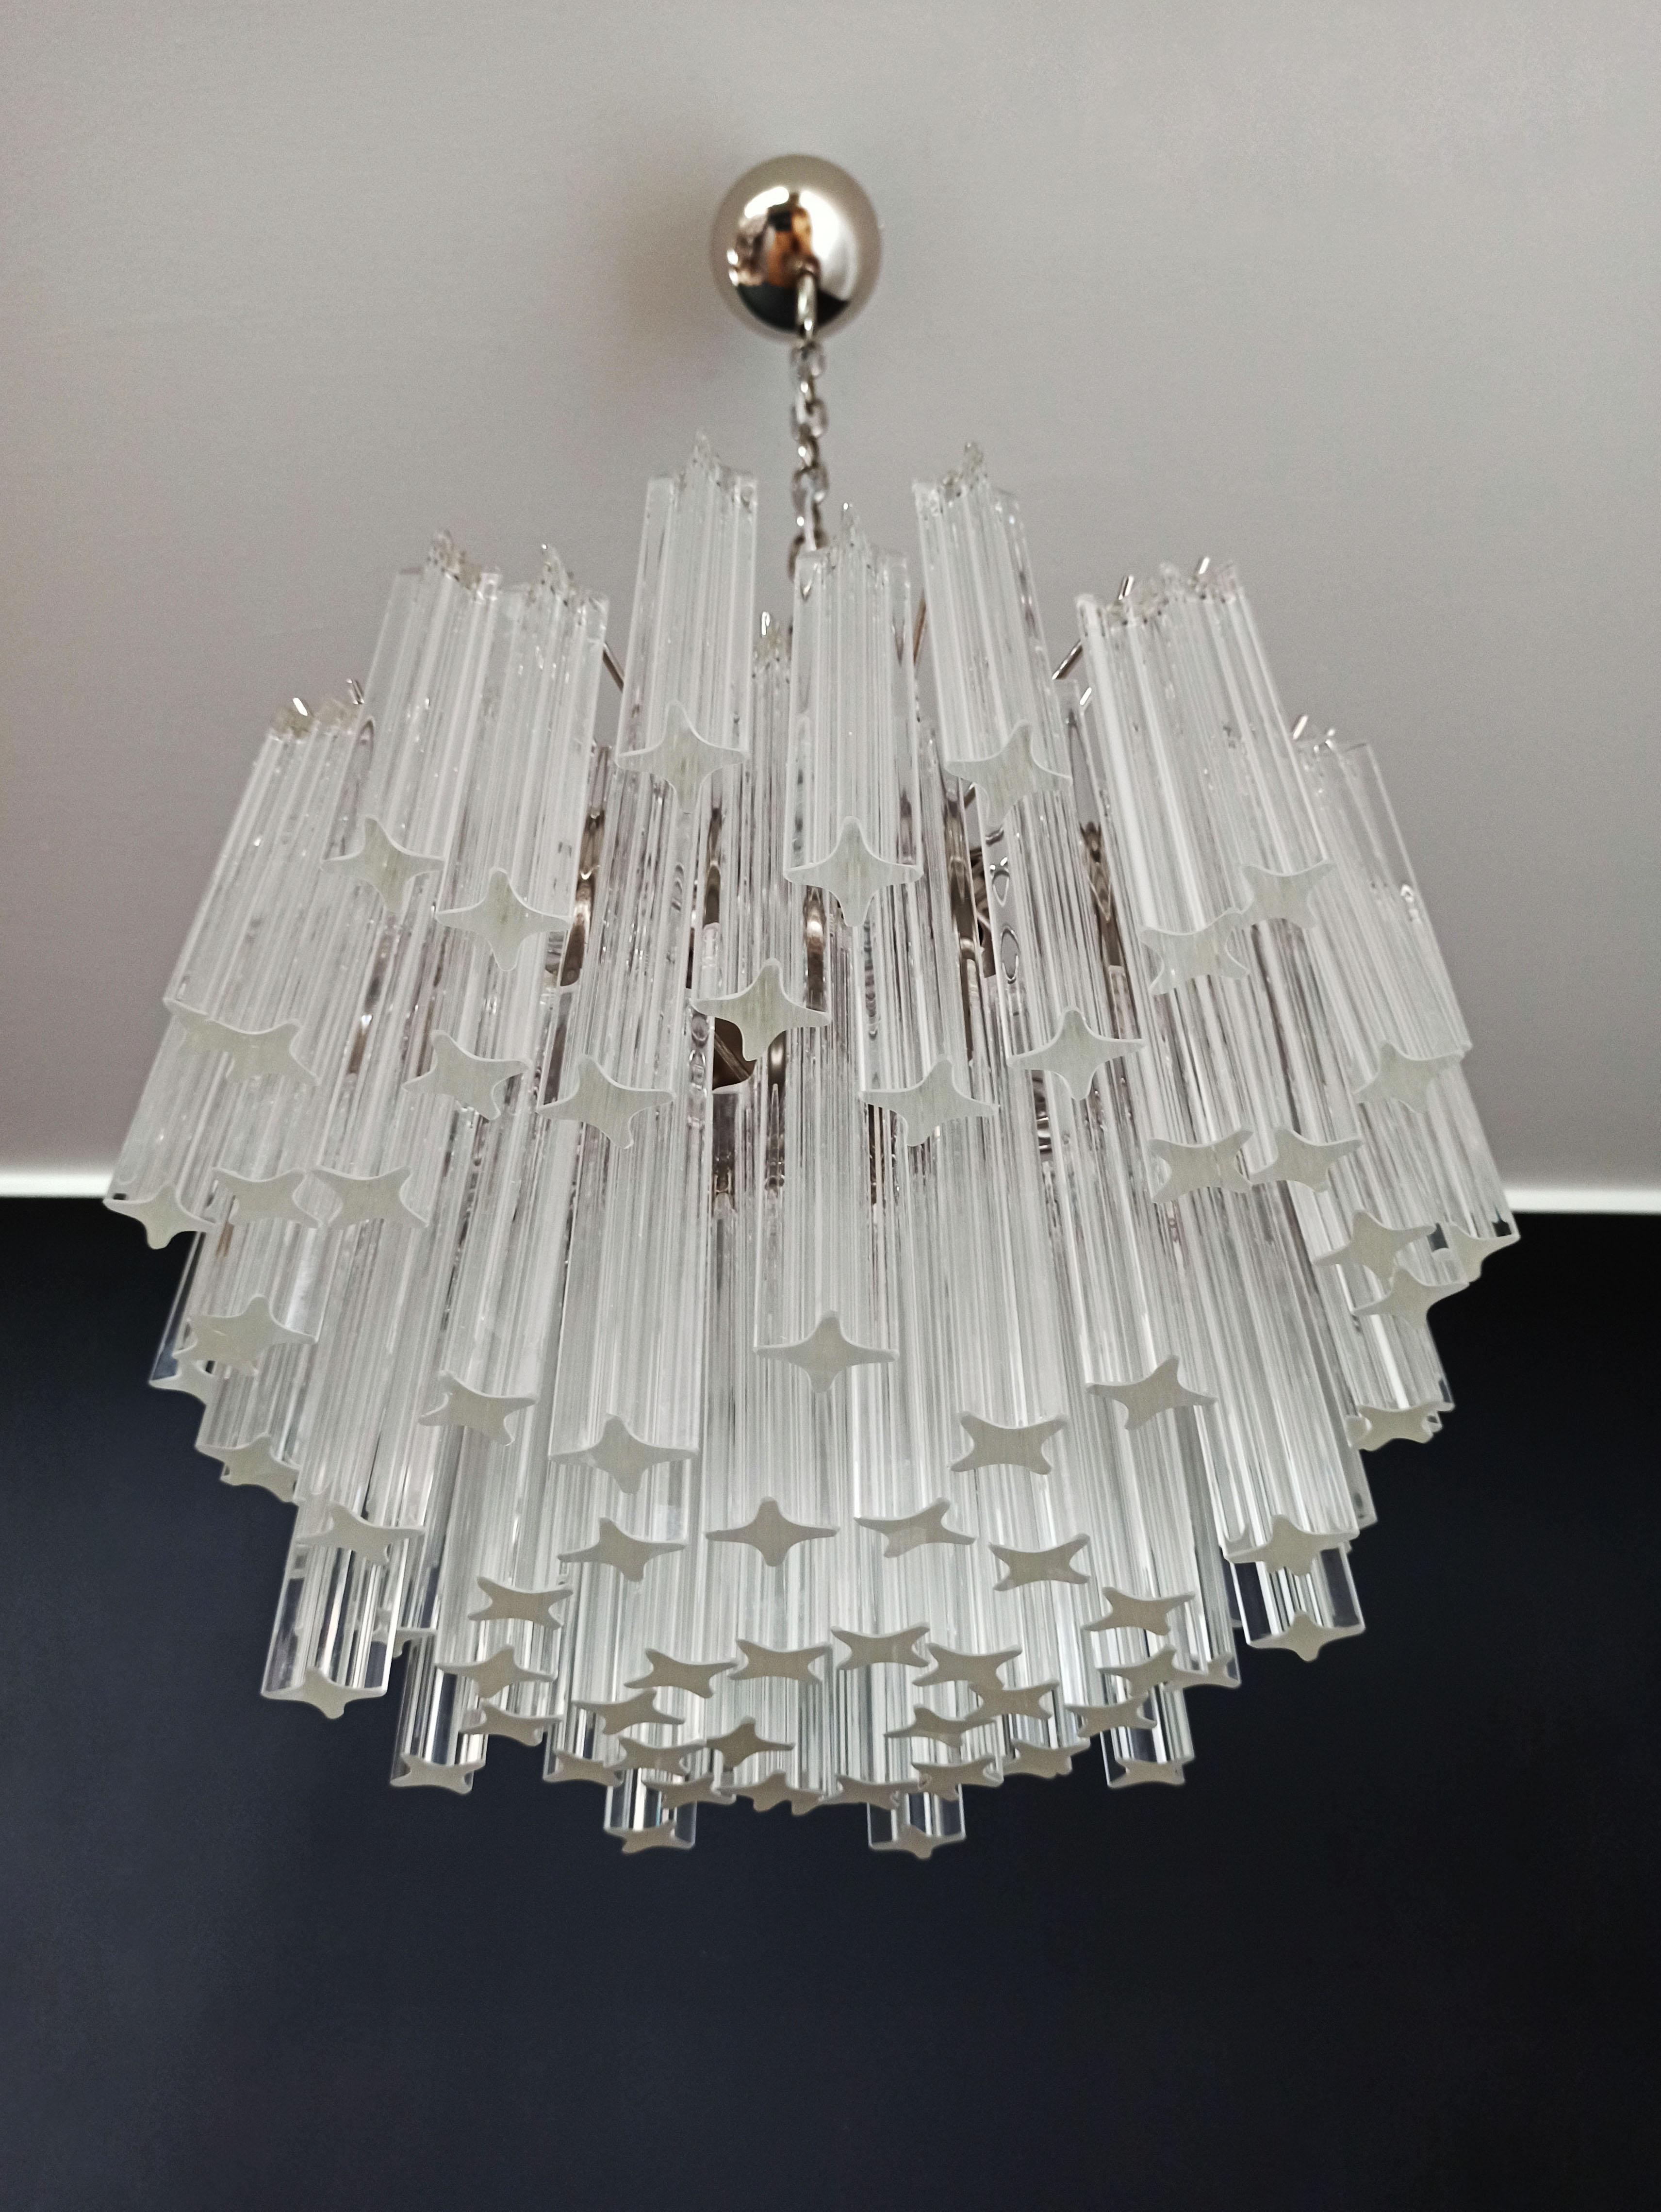 Fantastic vintage Murano chandelier made by 107 Murano crystal prism quadriedri in a nickel metal frame.

Period: 1980s

Dimensions: 45.25 inches height (115 cm) with chain; 15.75 inches height (40 cm) without chain; 17.70 inches diameter (45